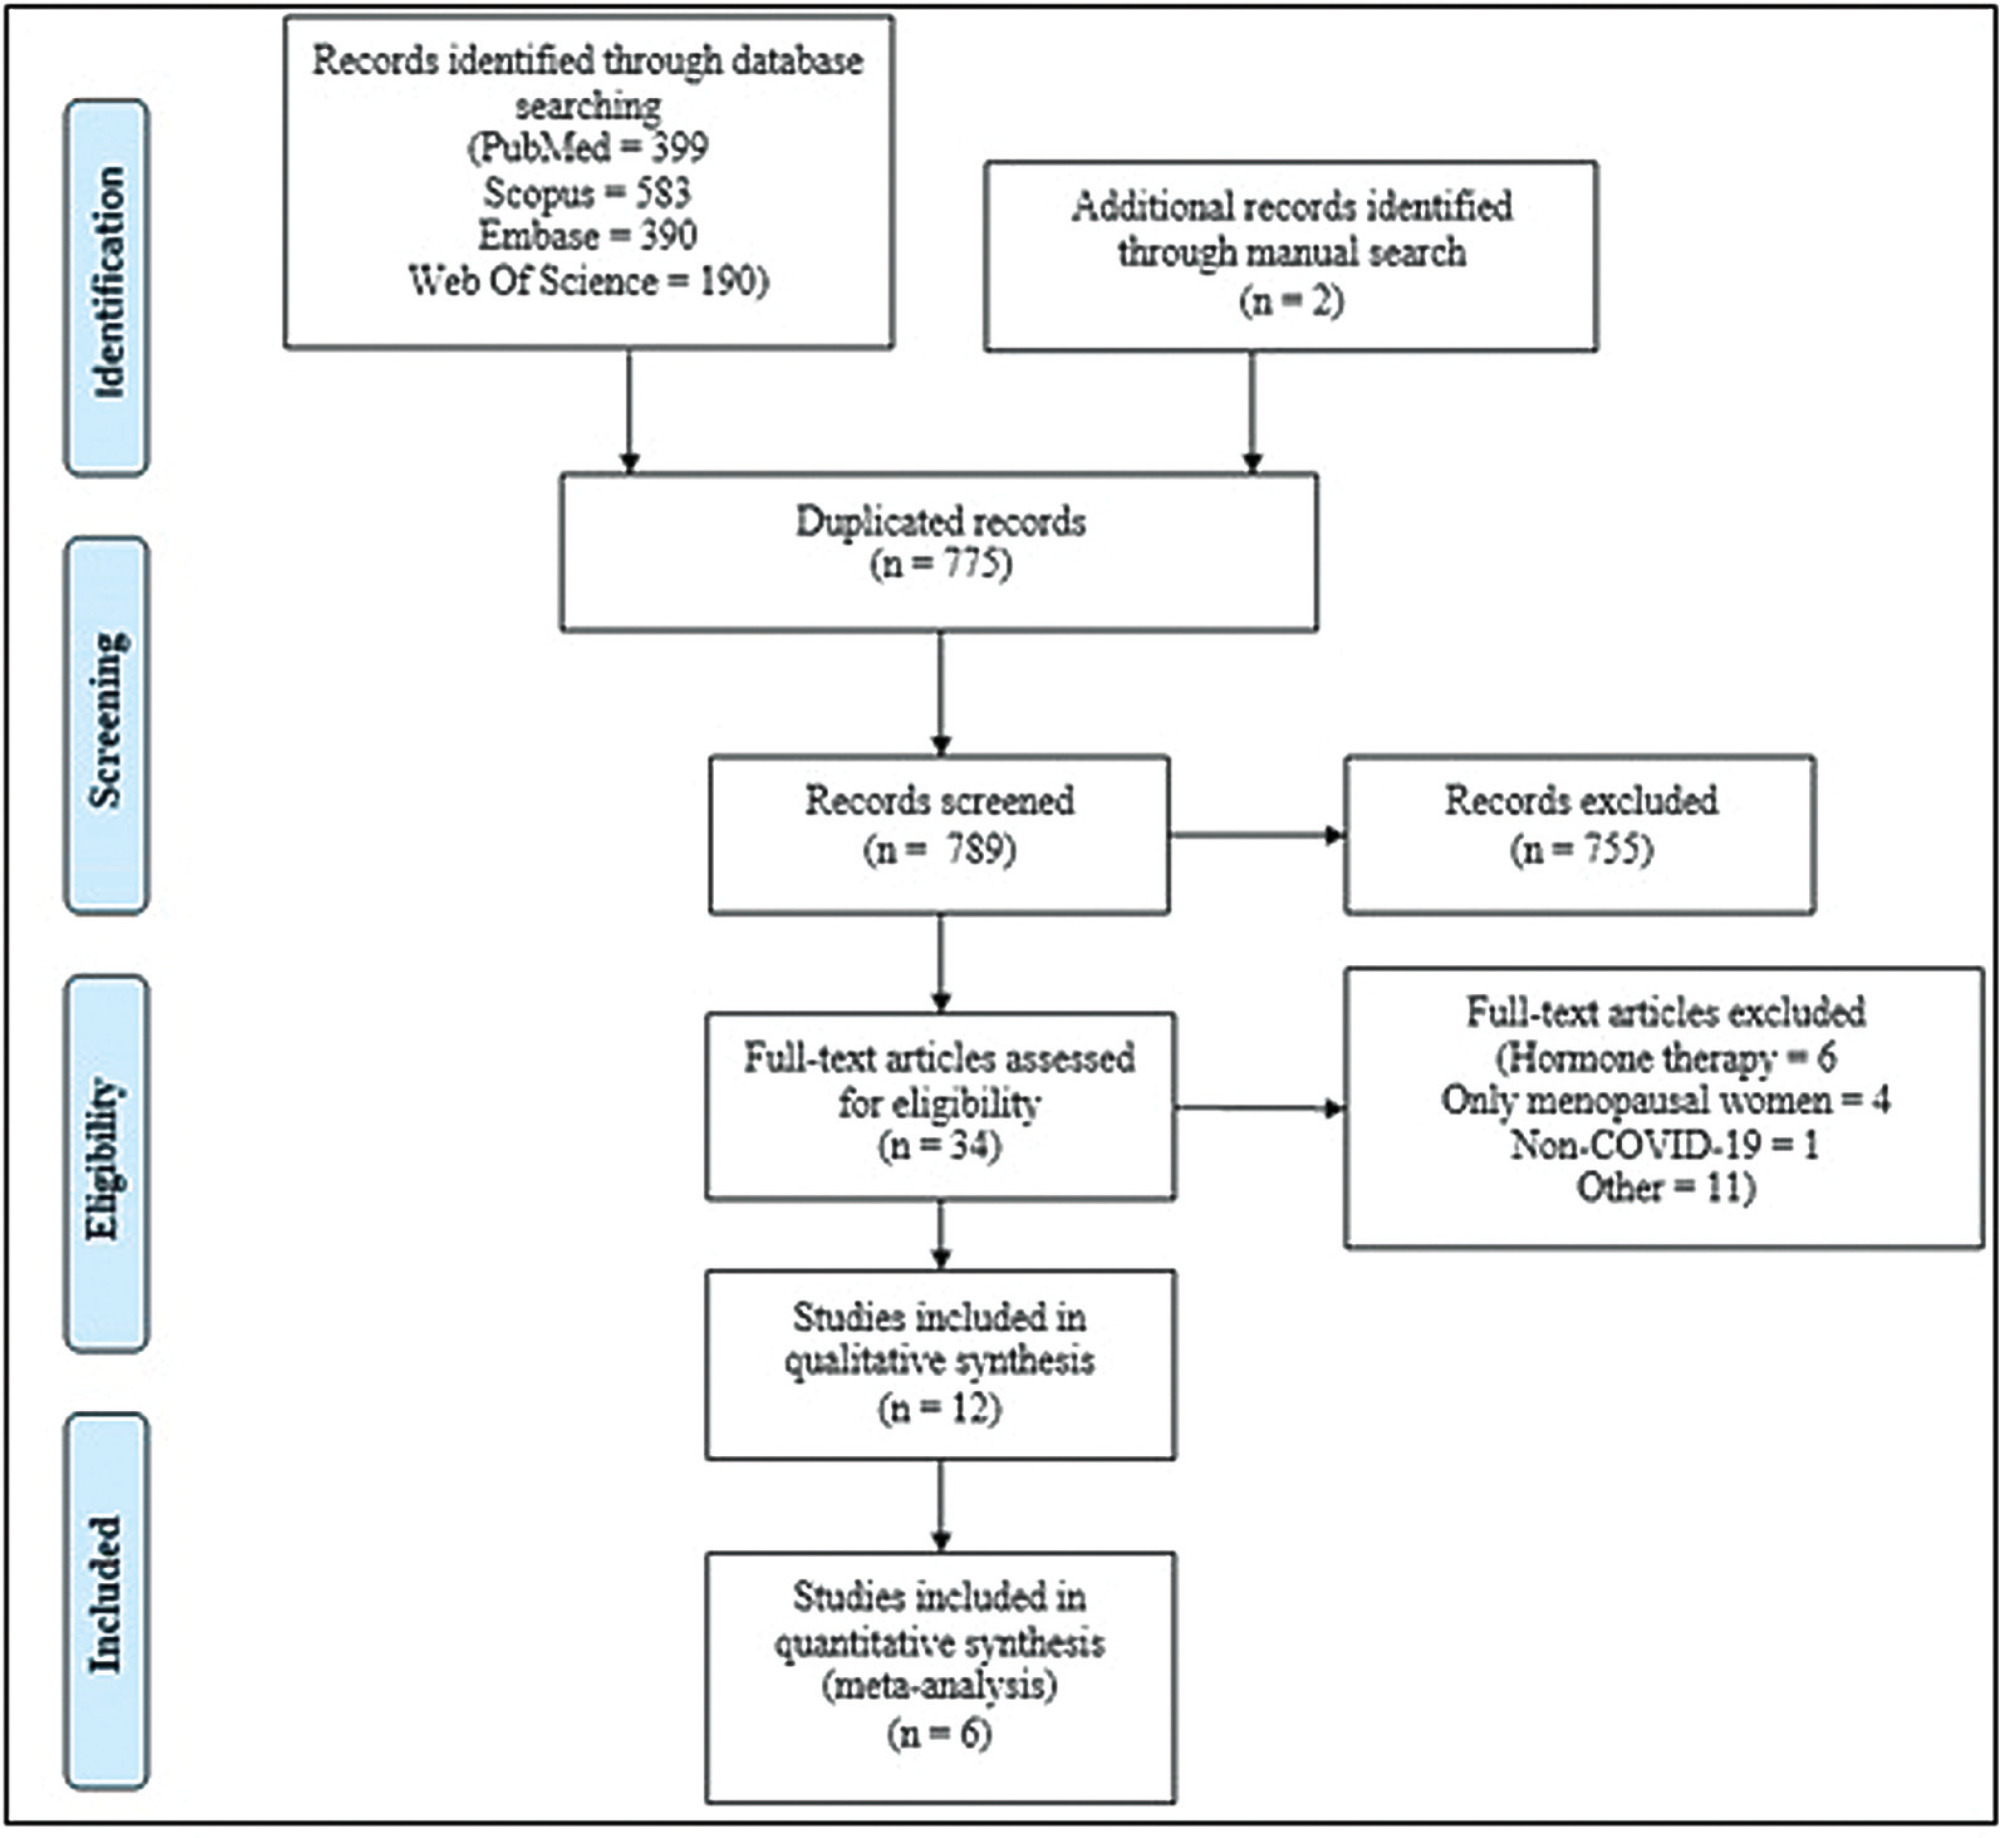 Incidence and Outcomes Associated with Menopausal Status in COVID-19 Patients: A Systematic Review and Meta-analysis